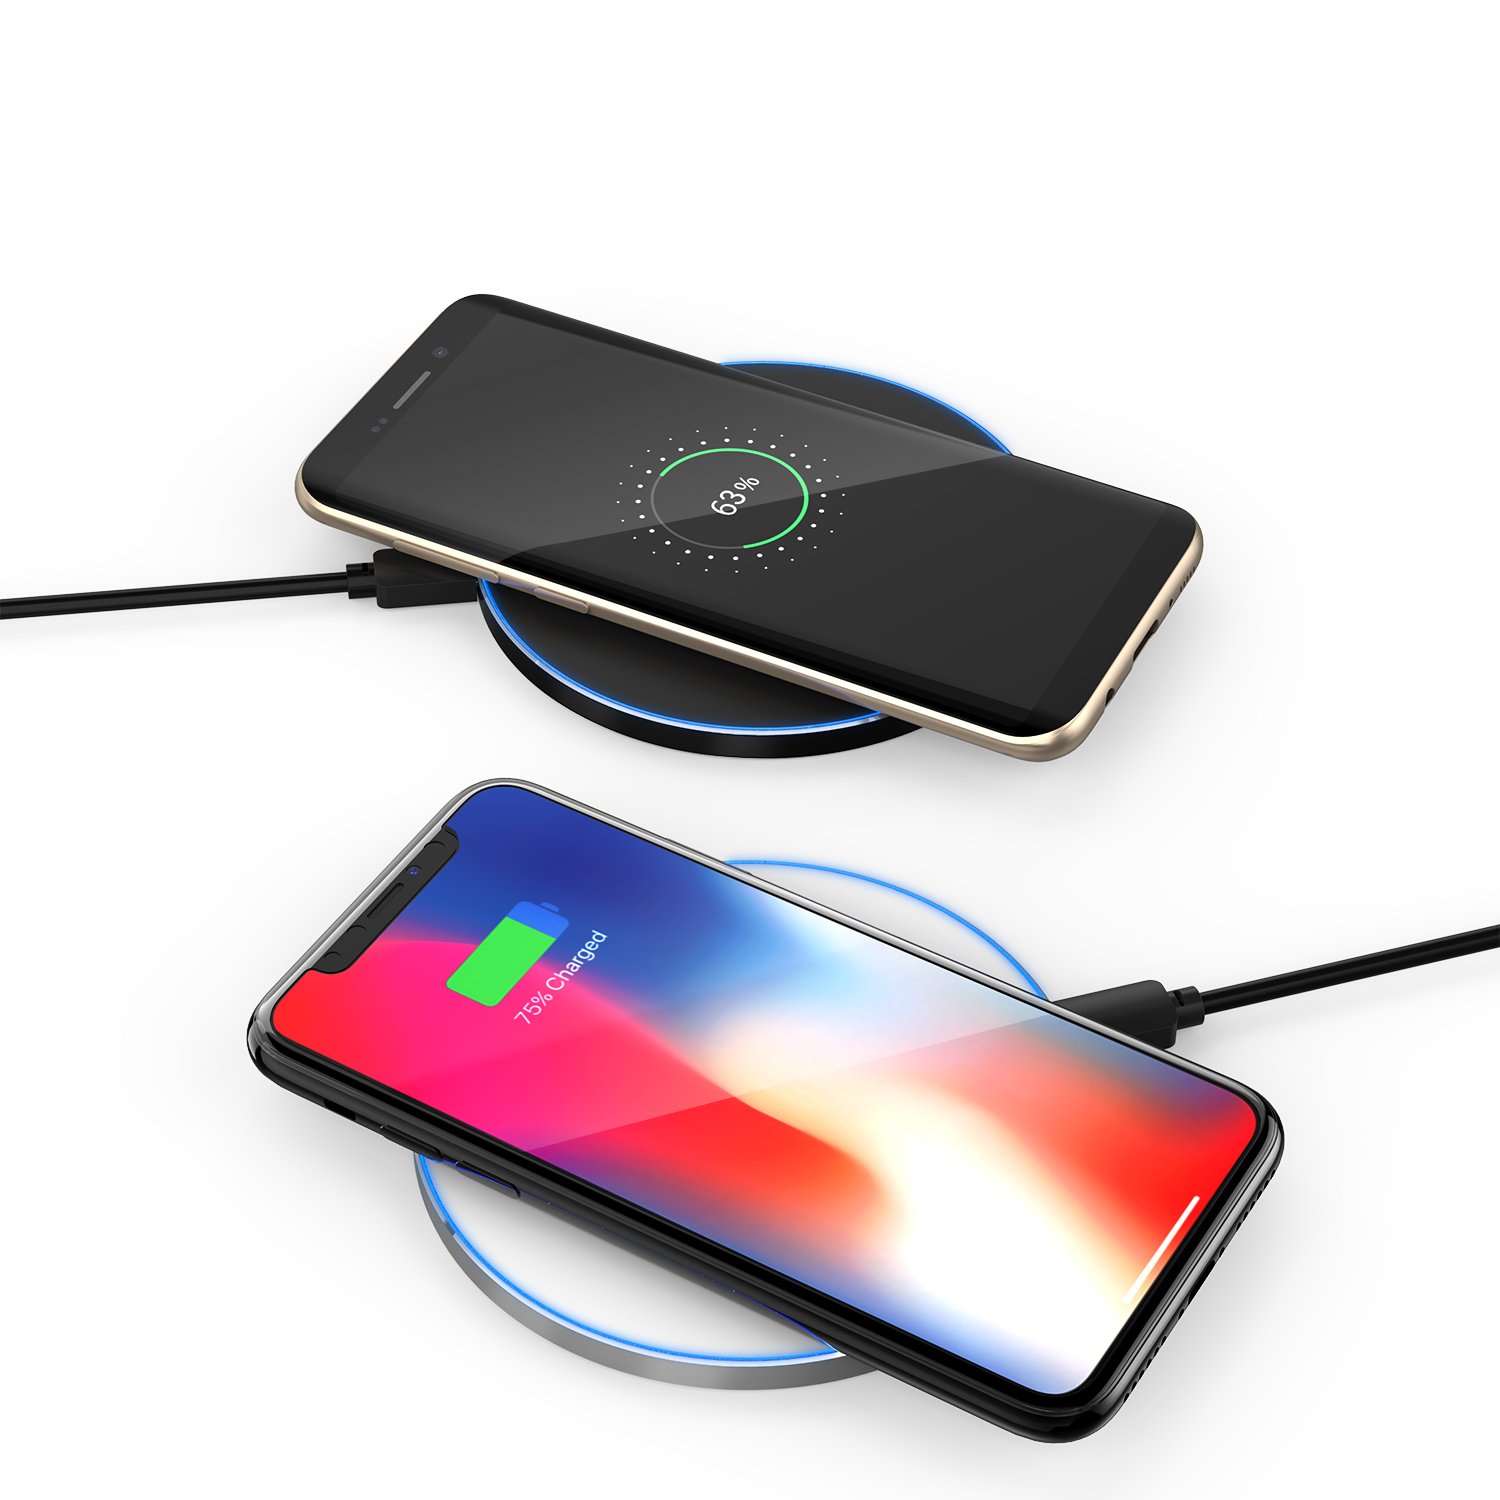 

Bakeey C1 10W QI Wireless Charger Charging Pad With indicator Light For iPhone X 8/8Plus Samsung S8